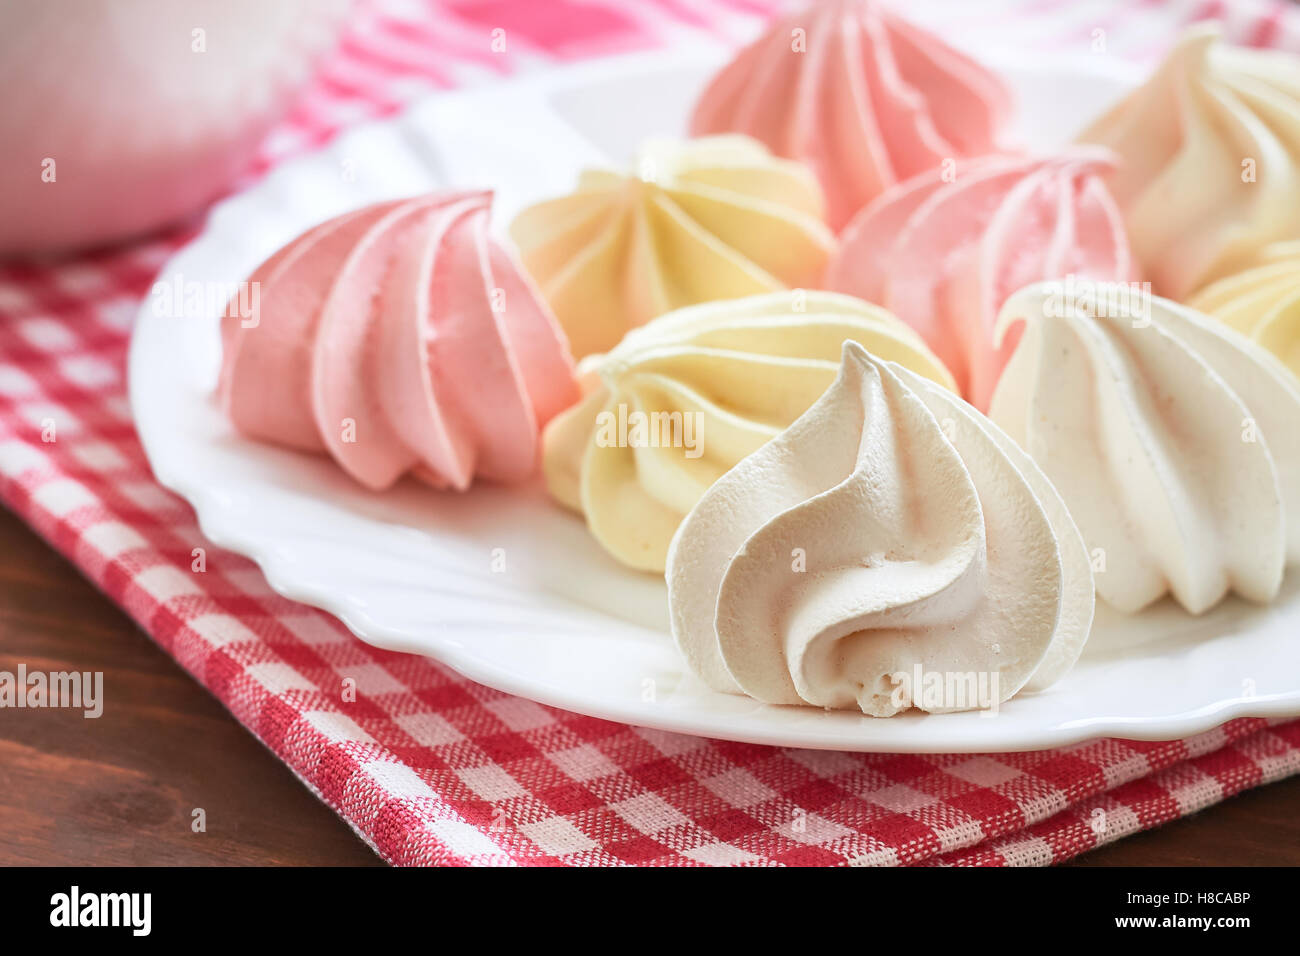 Fresh delicious colored meringue cookies served on white plate Stock Photo